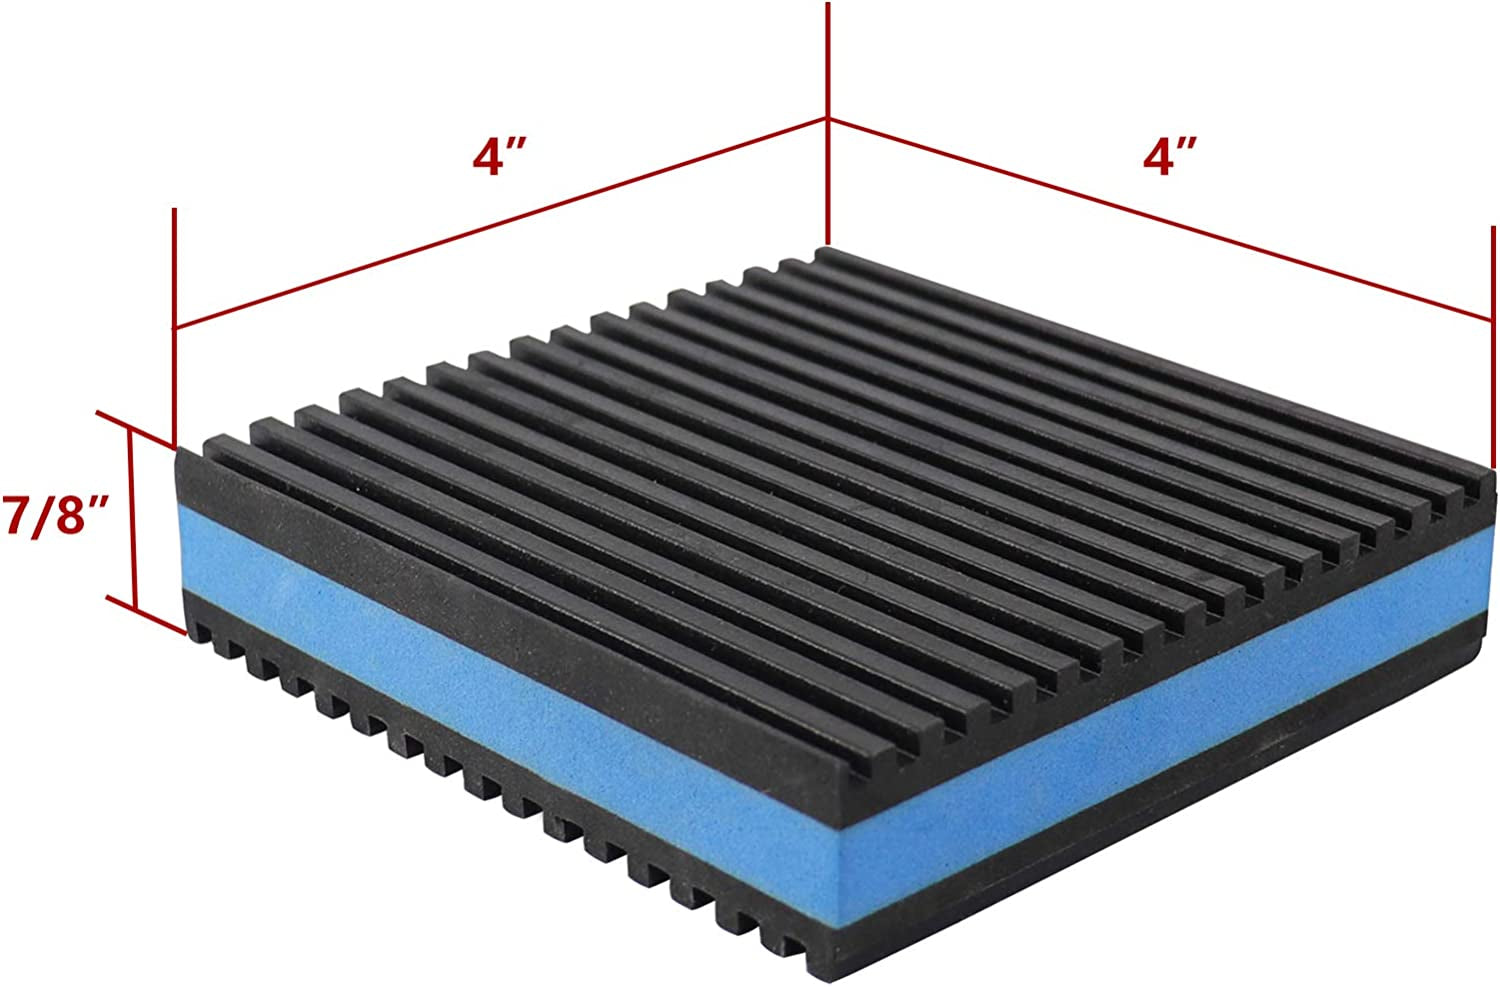 LBG Products, LBG Products Rubber Anti-Vibration Isolator Pads,Heavy Duty Blue EVA Pad for Air Conditioner,Compressors,Hvac,Treadmills Etc(4'' X 4'' X 7/8")